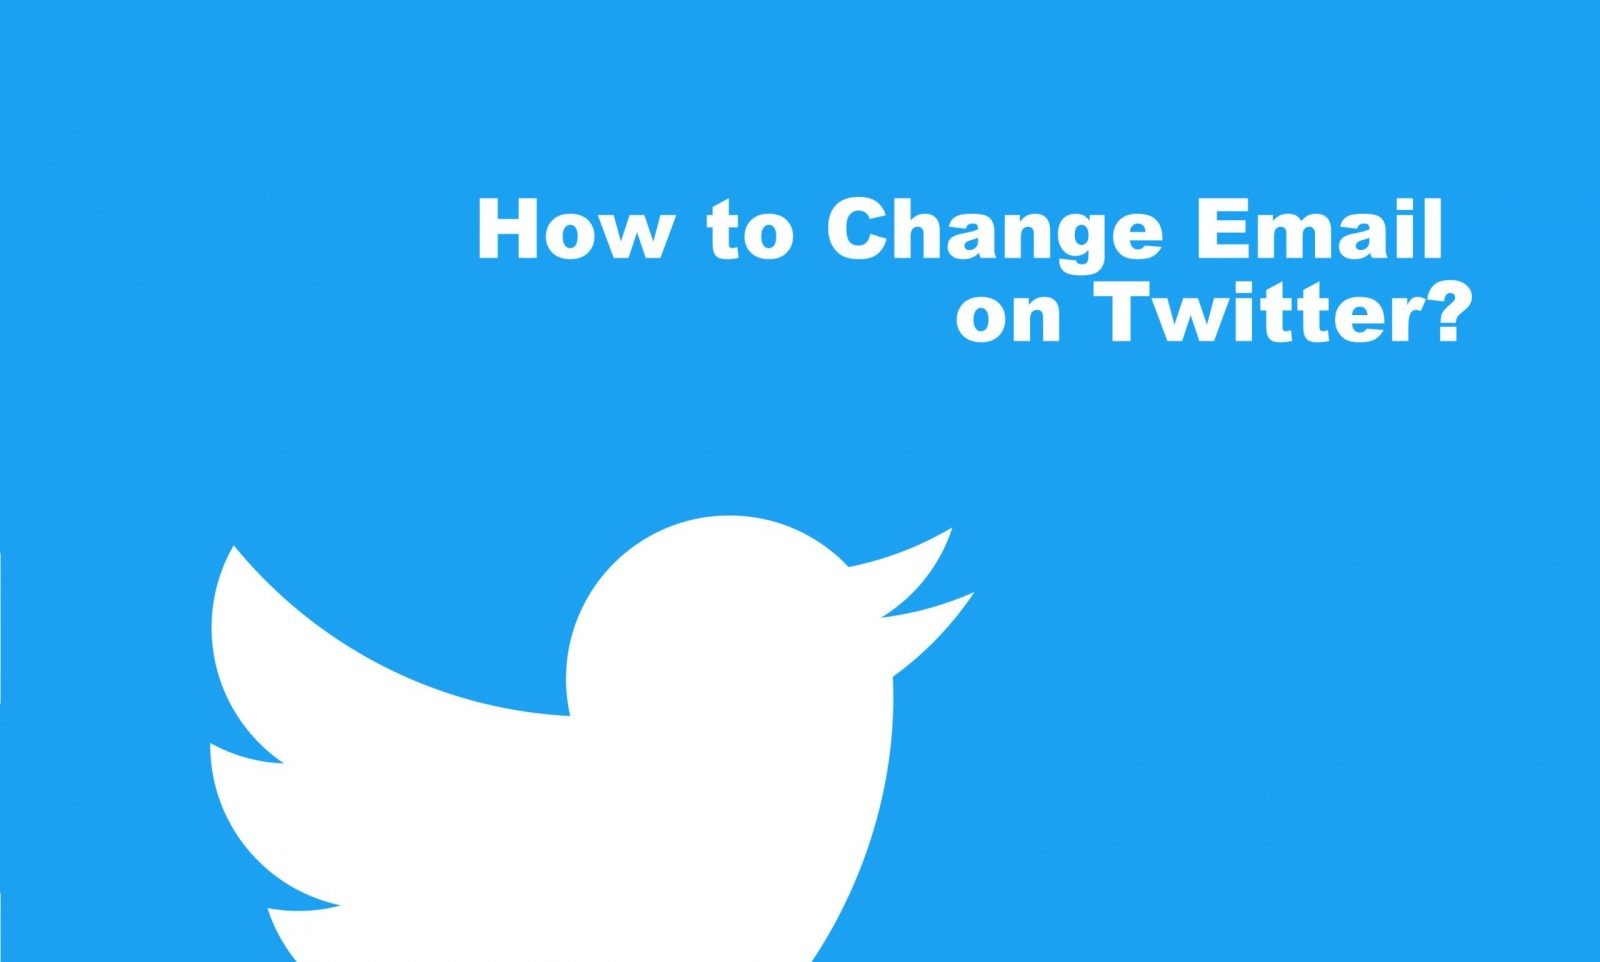 How to Change Email on Twitter